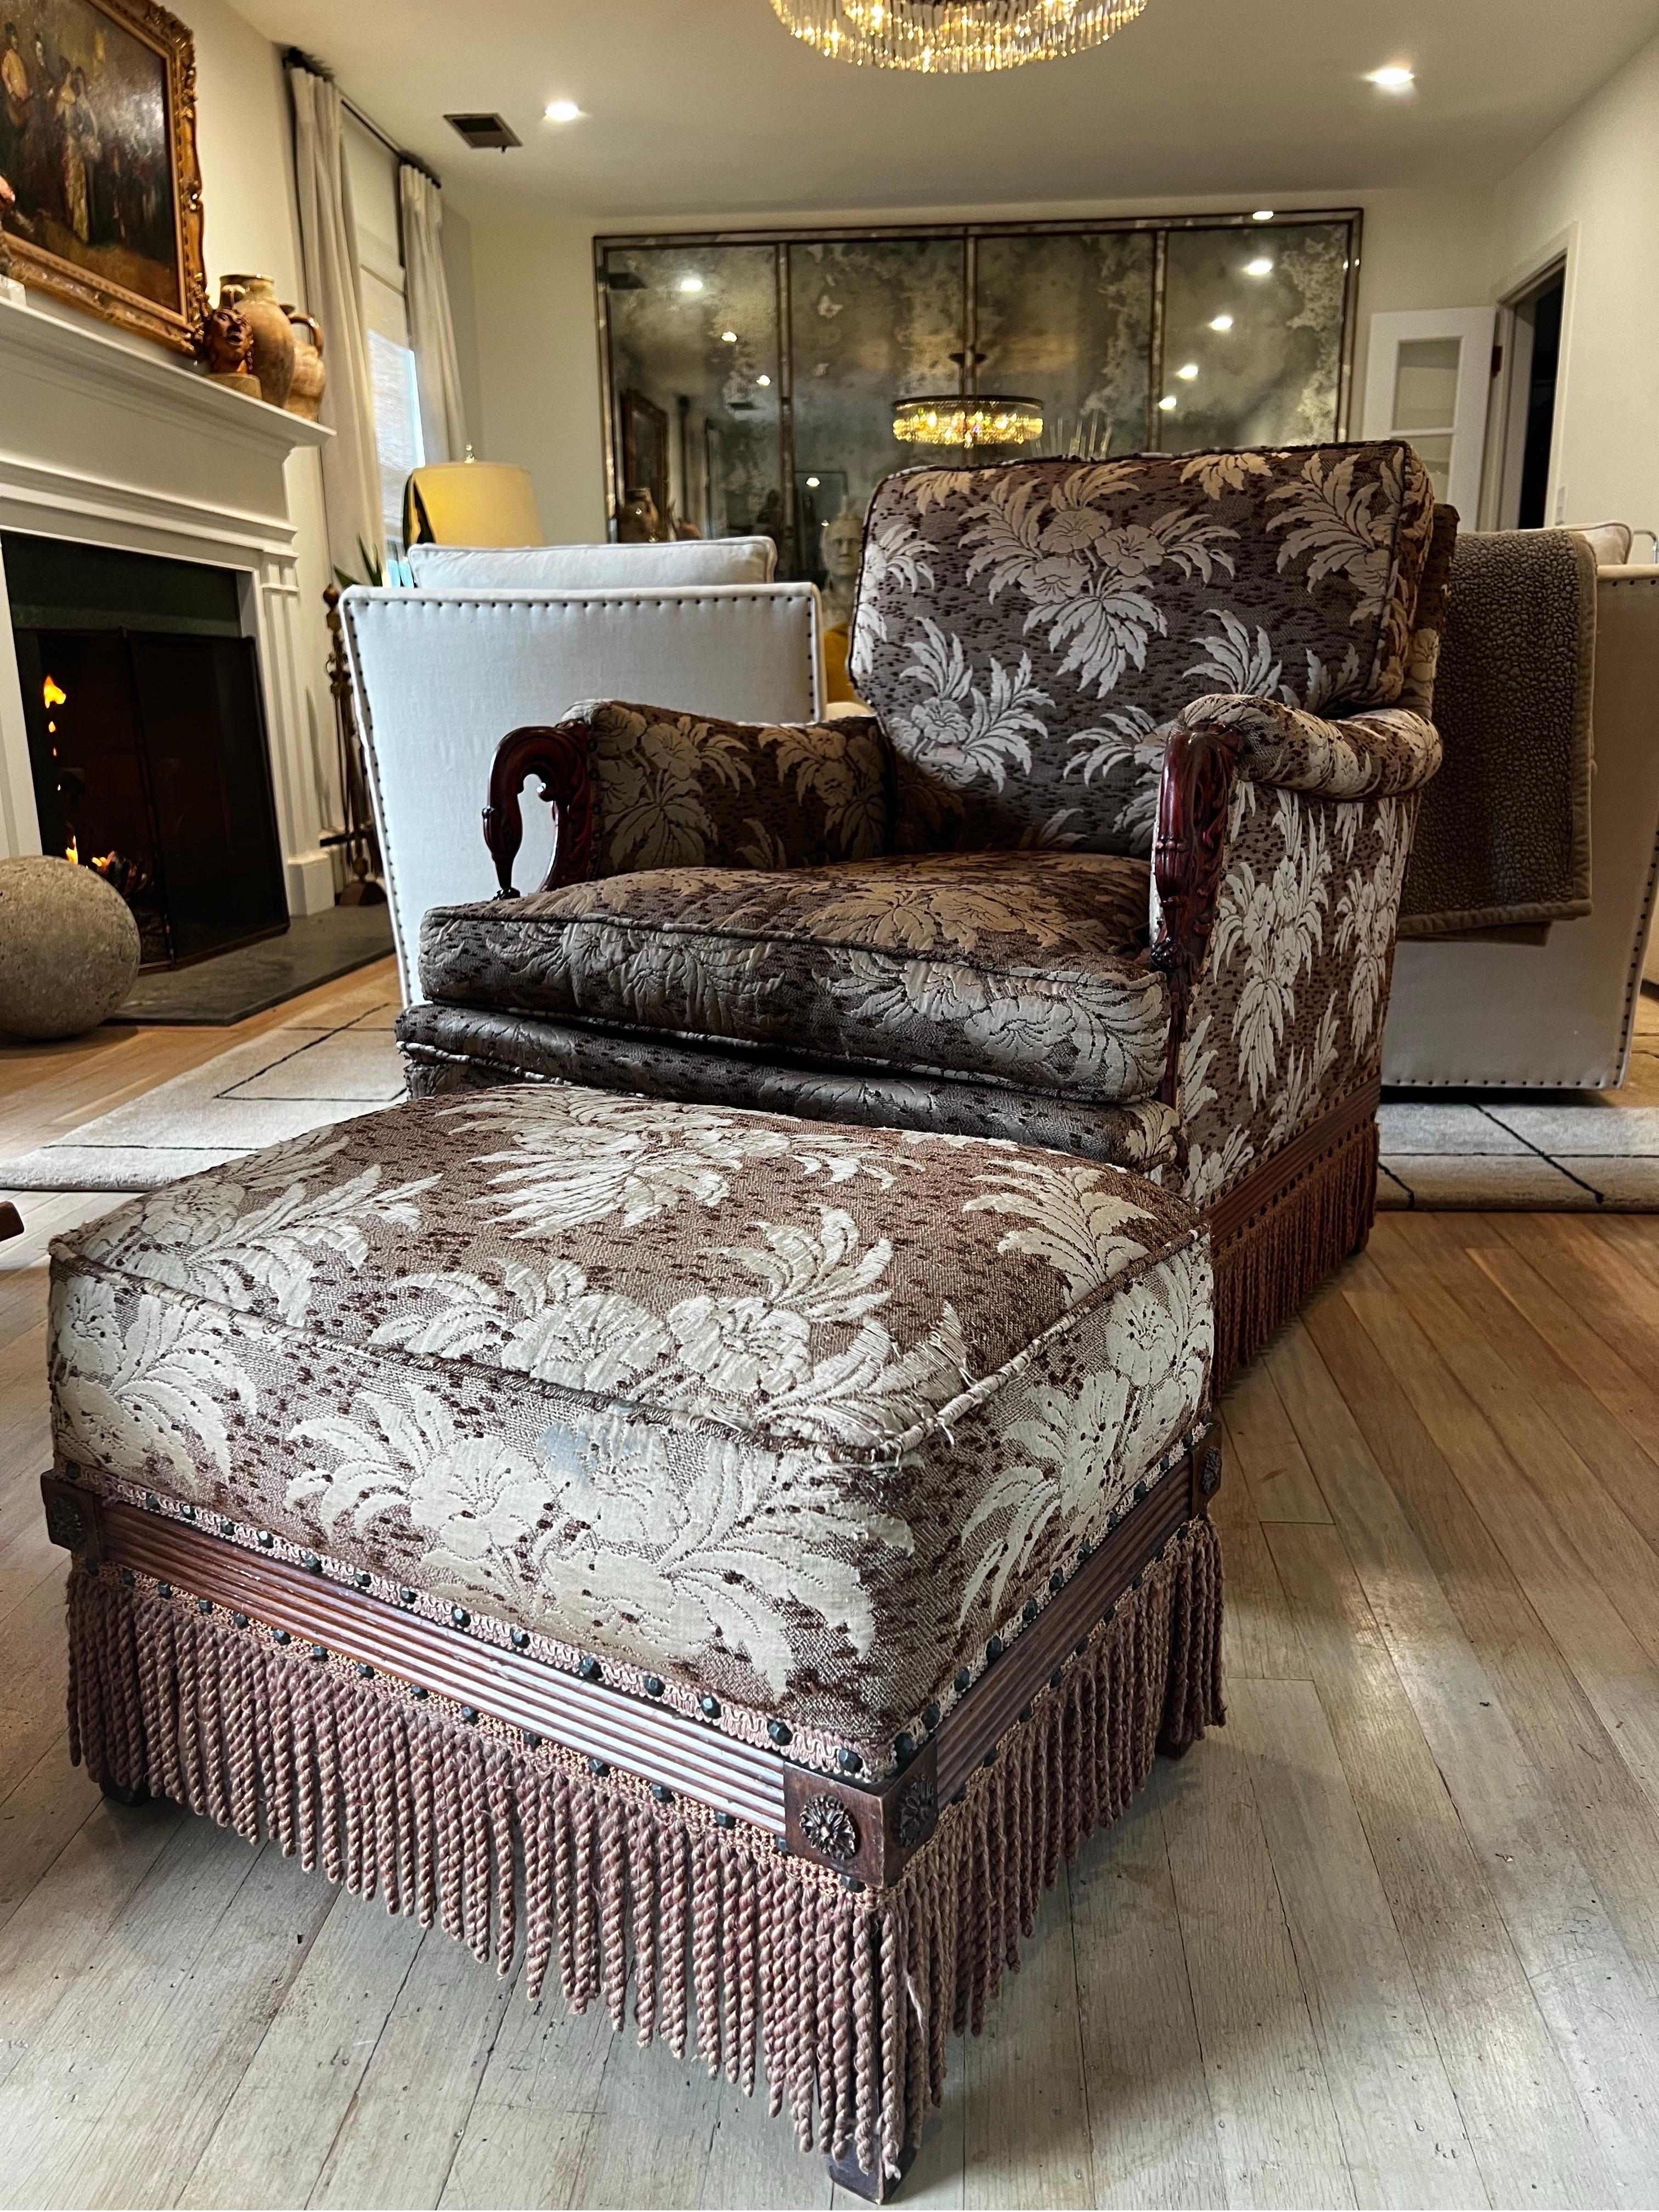 Impressive custom Victorian armchair with ottoman.  Built for comfort and crafted in mahogany with carved arms and trim along the base.  Upholstered in Pennsylvania with floral japanese esq fabric with creamy greenish silver tone.  Skirted with